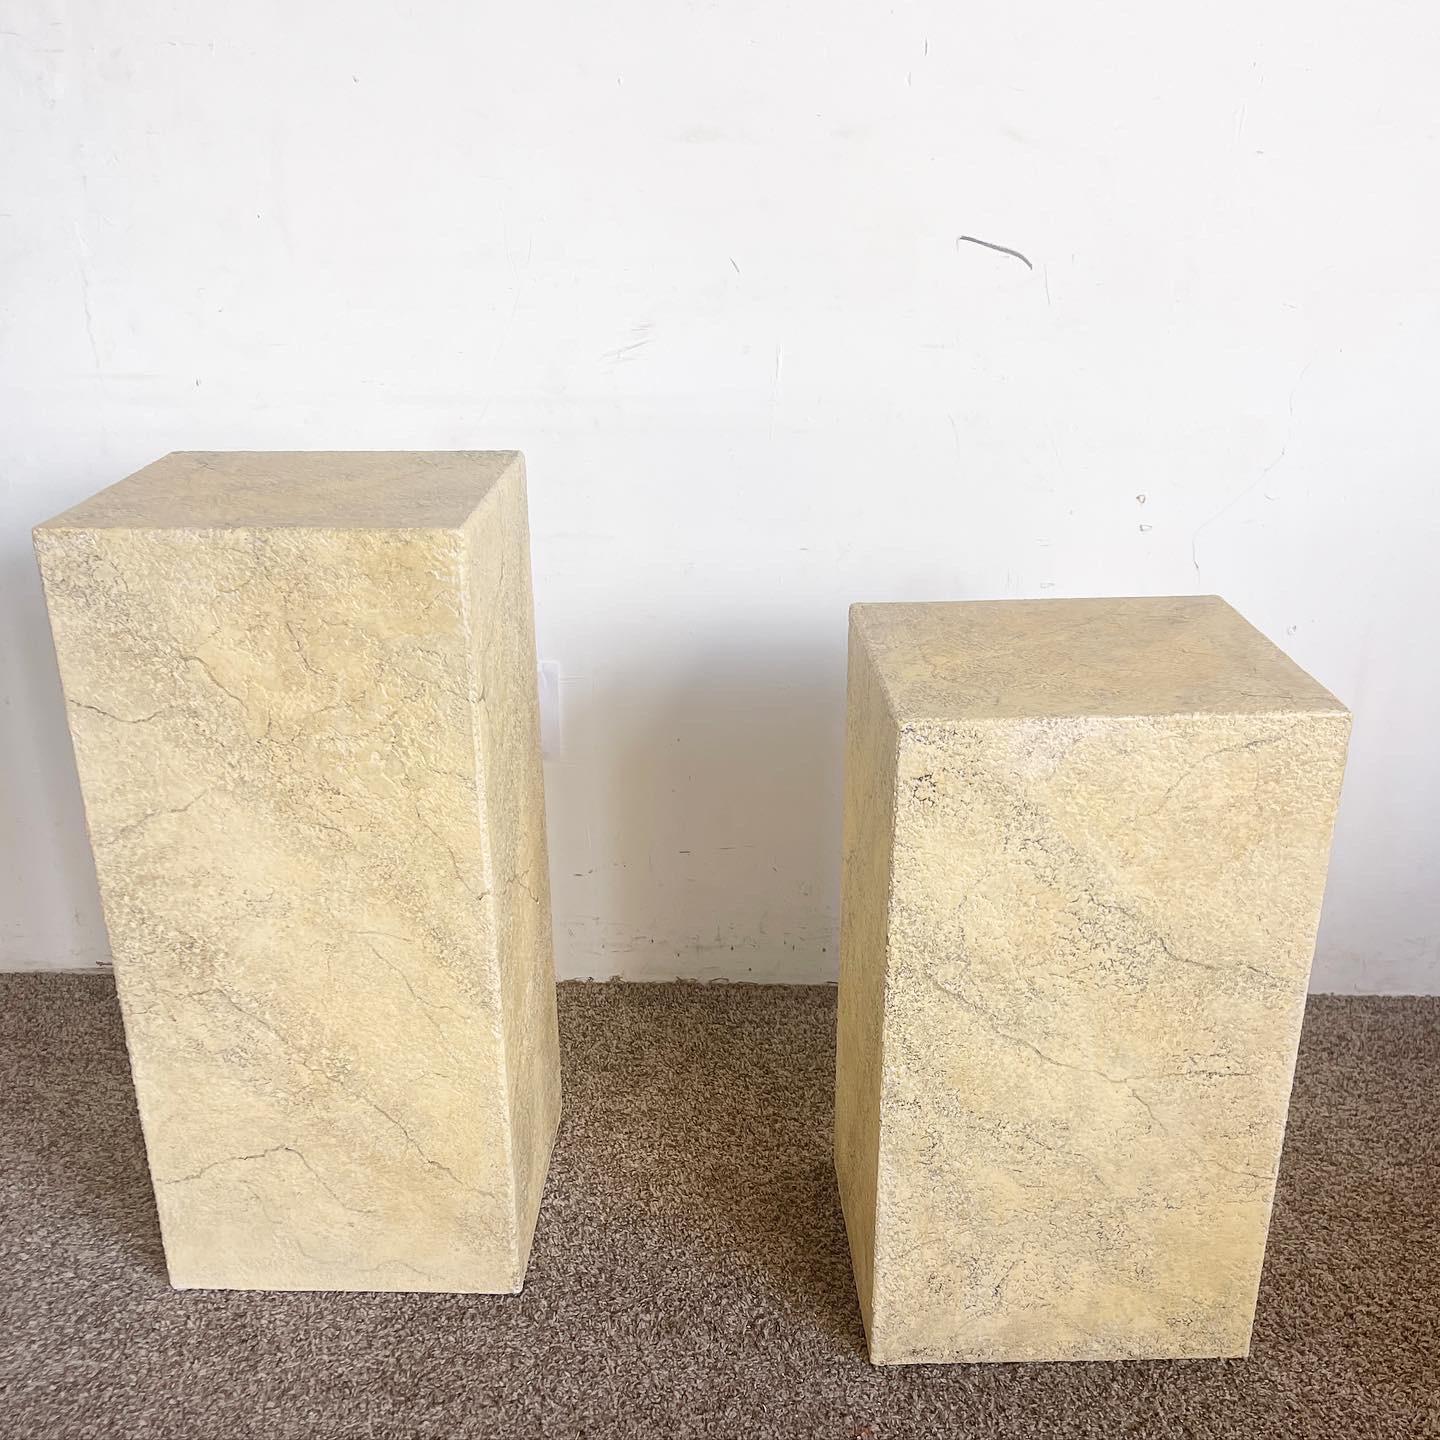 Late 20th Century Postmodern Faux Beige Stone Pedestals - a Pair For Sale